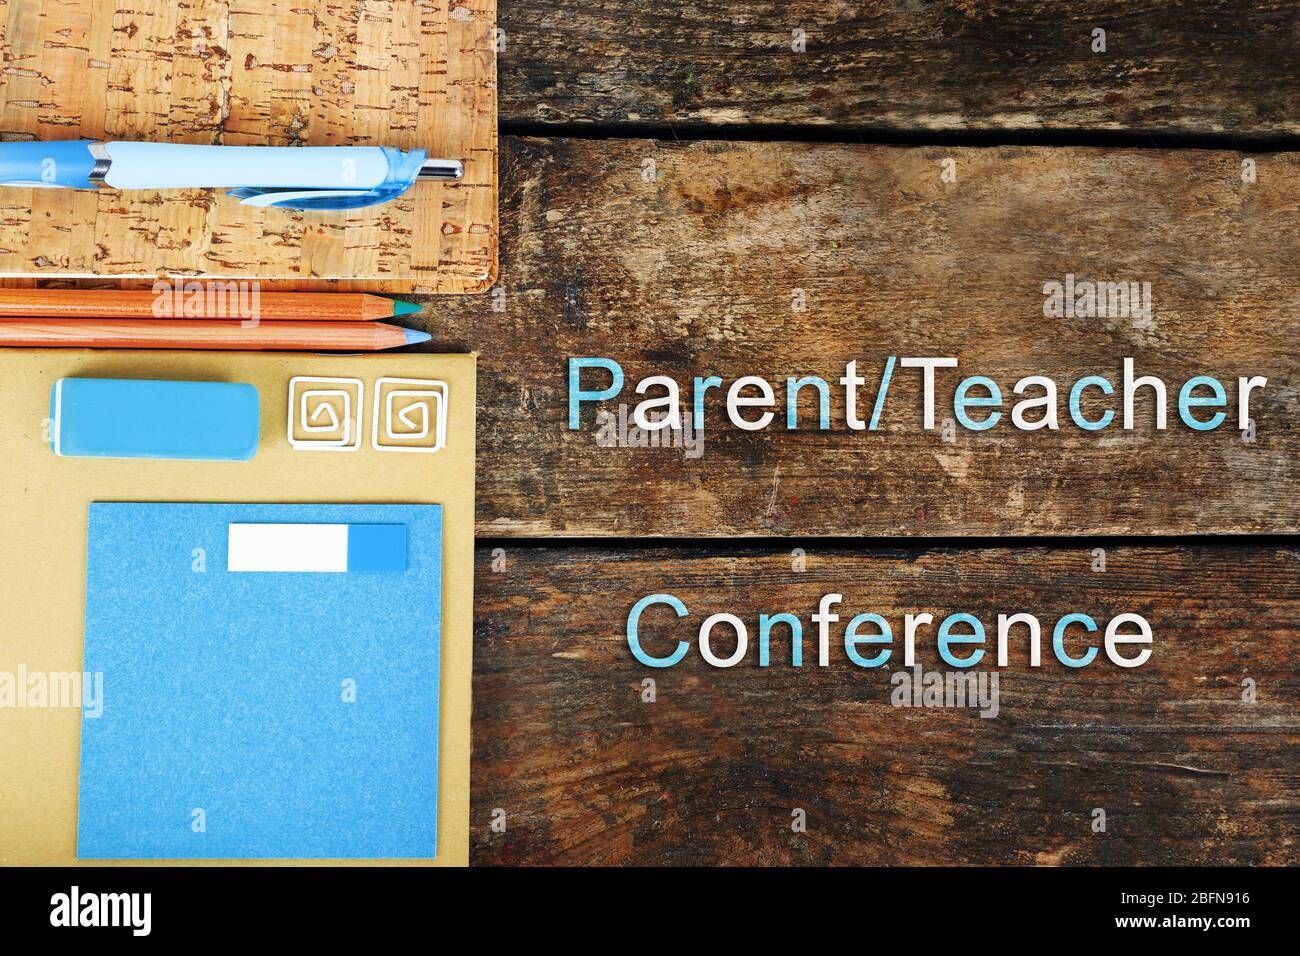 Stationary with text PARENT/TEACHER CONFERENCE on wooden background. School concept. Stock Photo